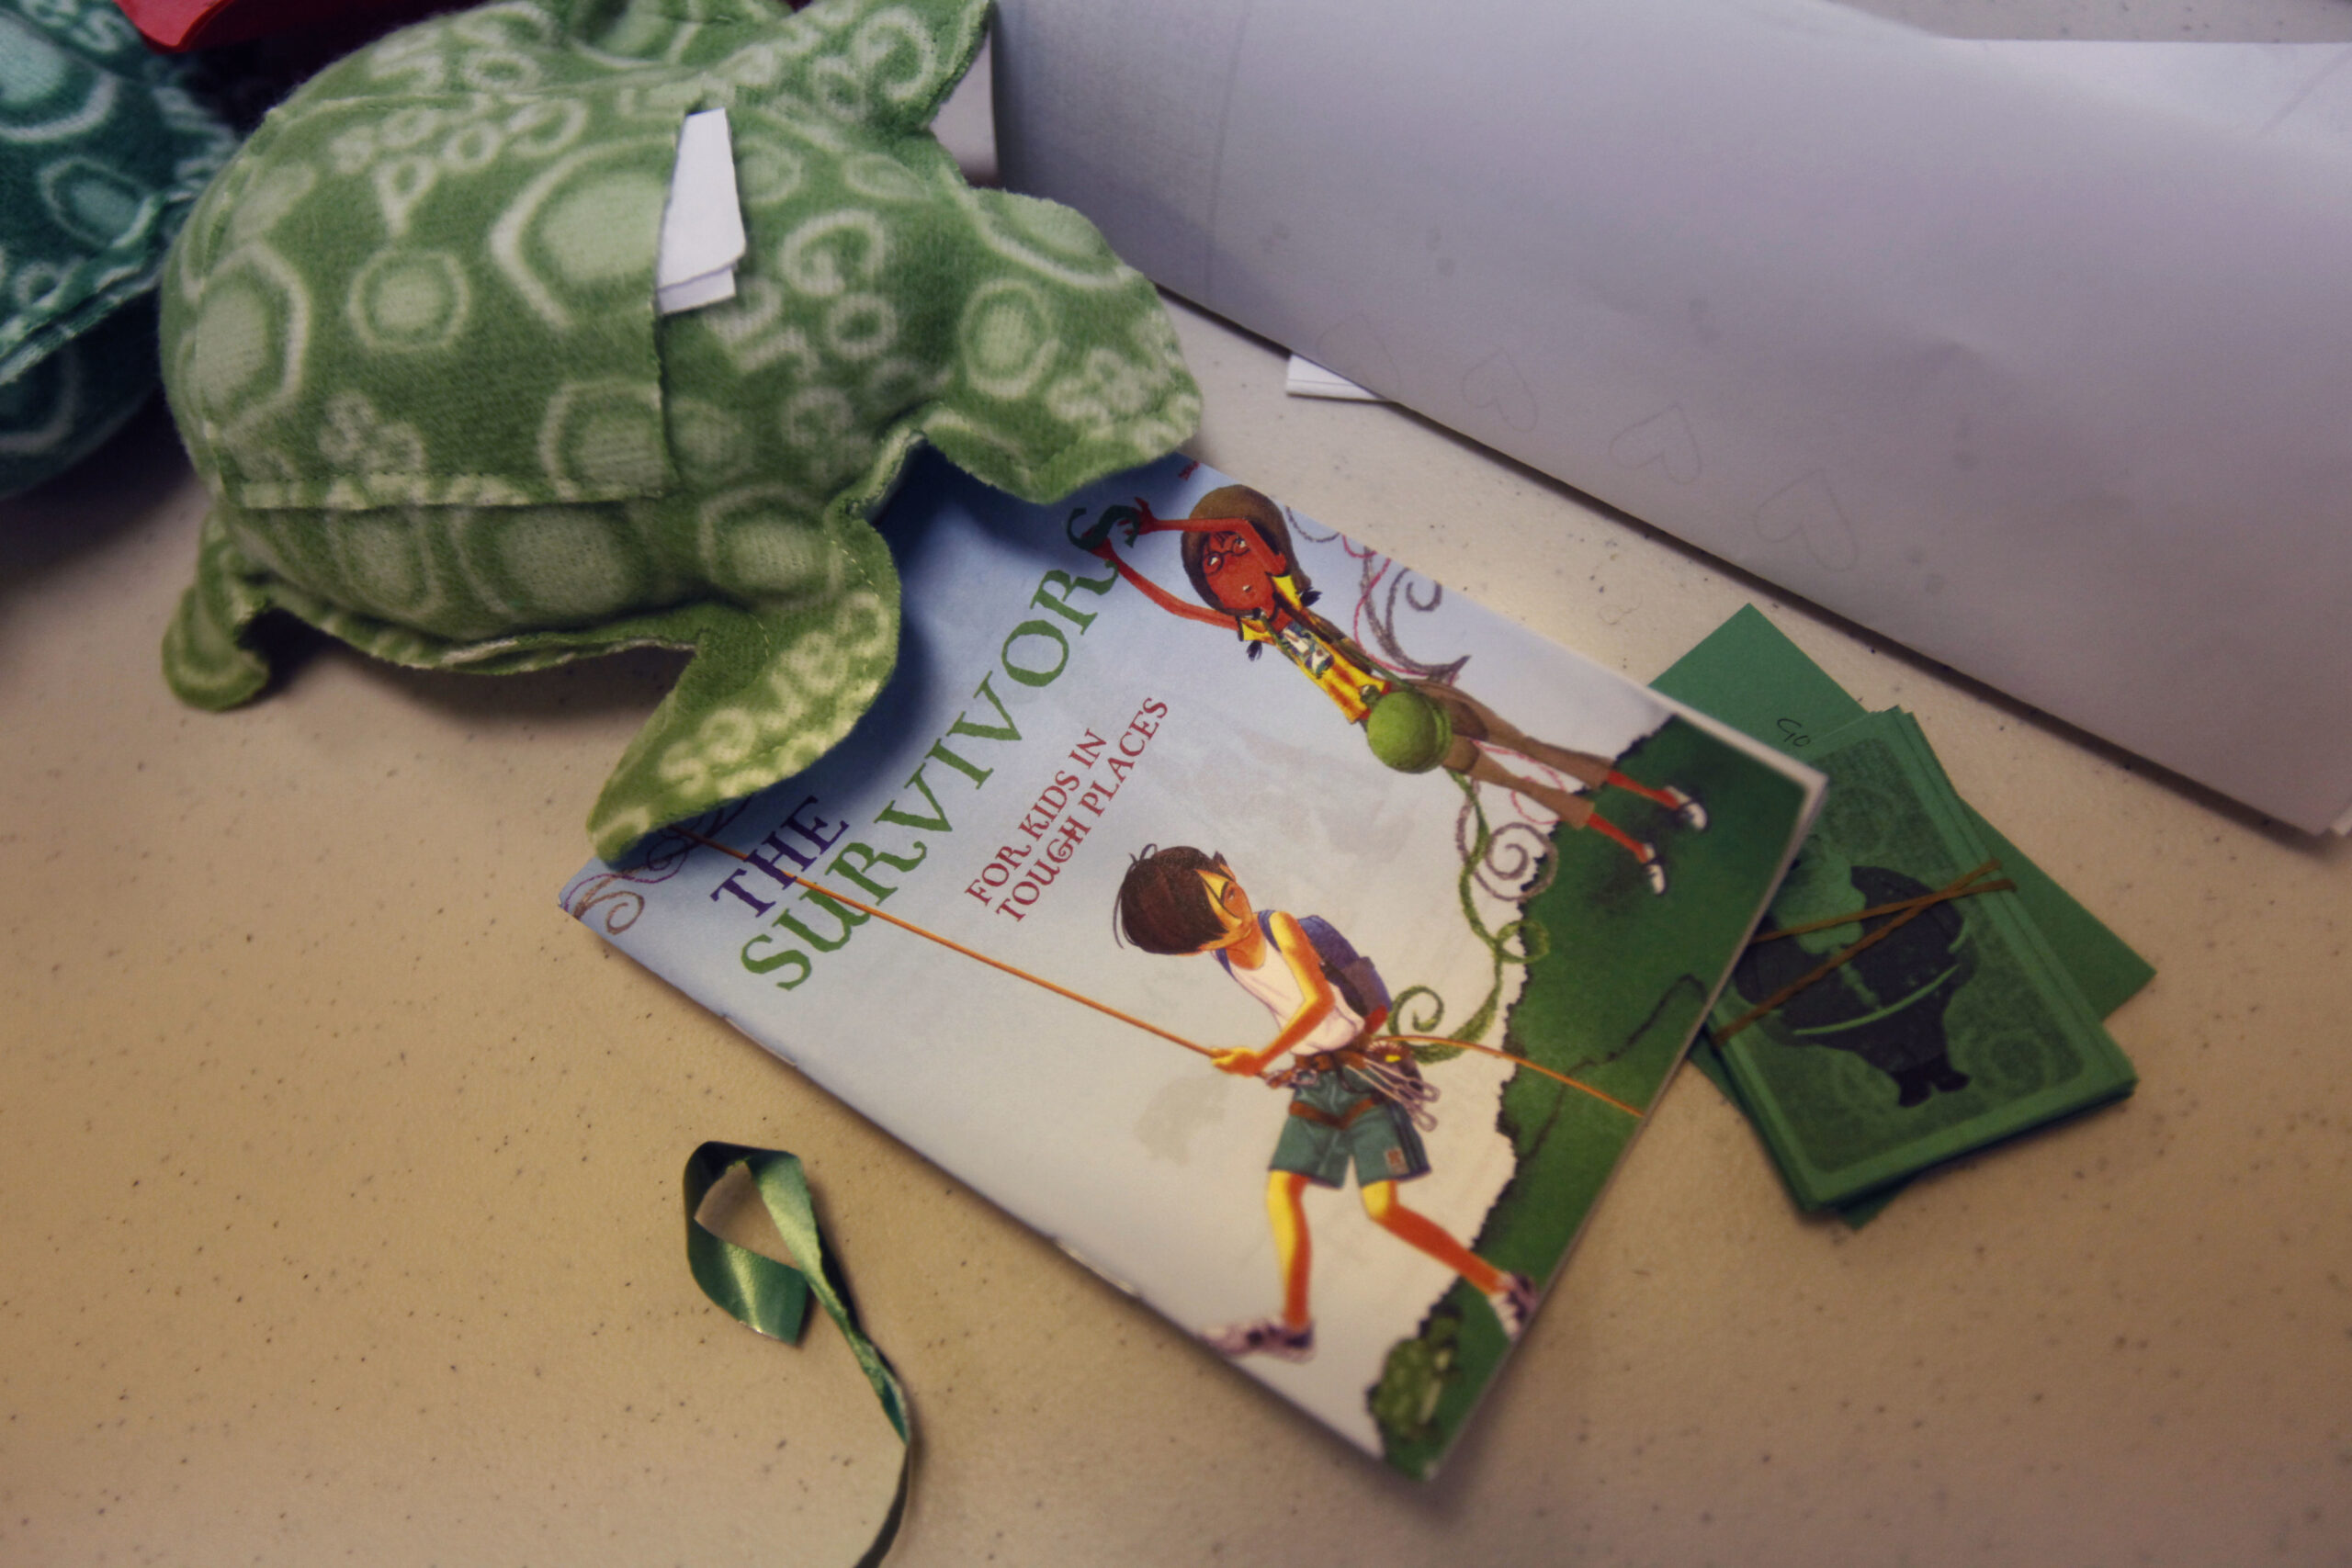 A children's book about coping is seen with a toy stuffed turtle as family members of prisoners